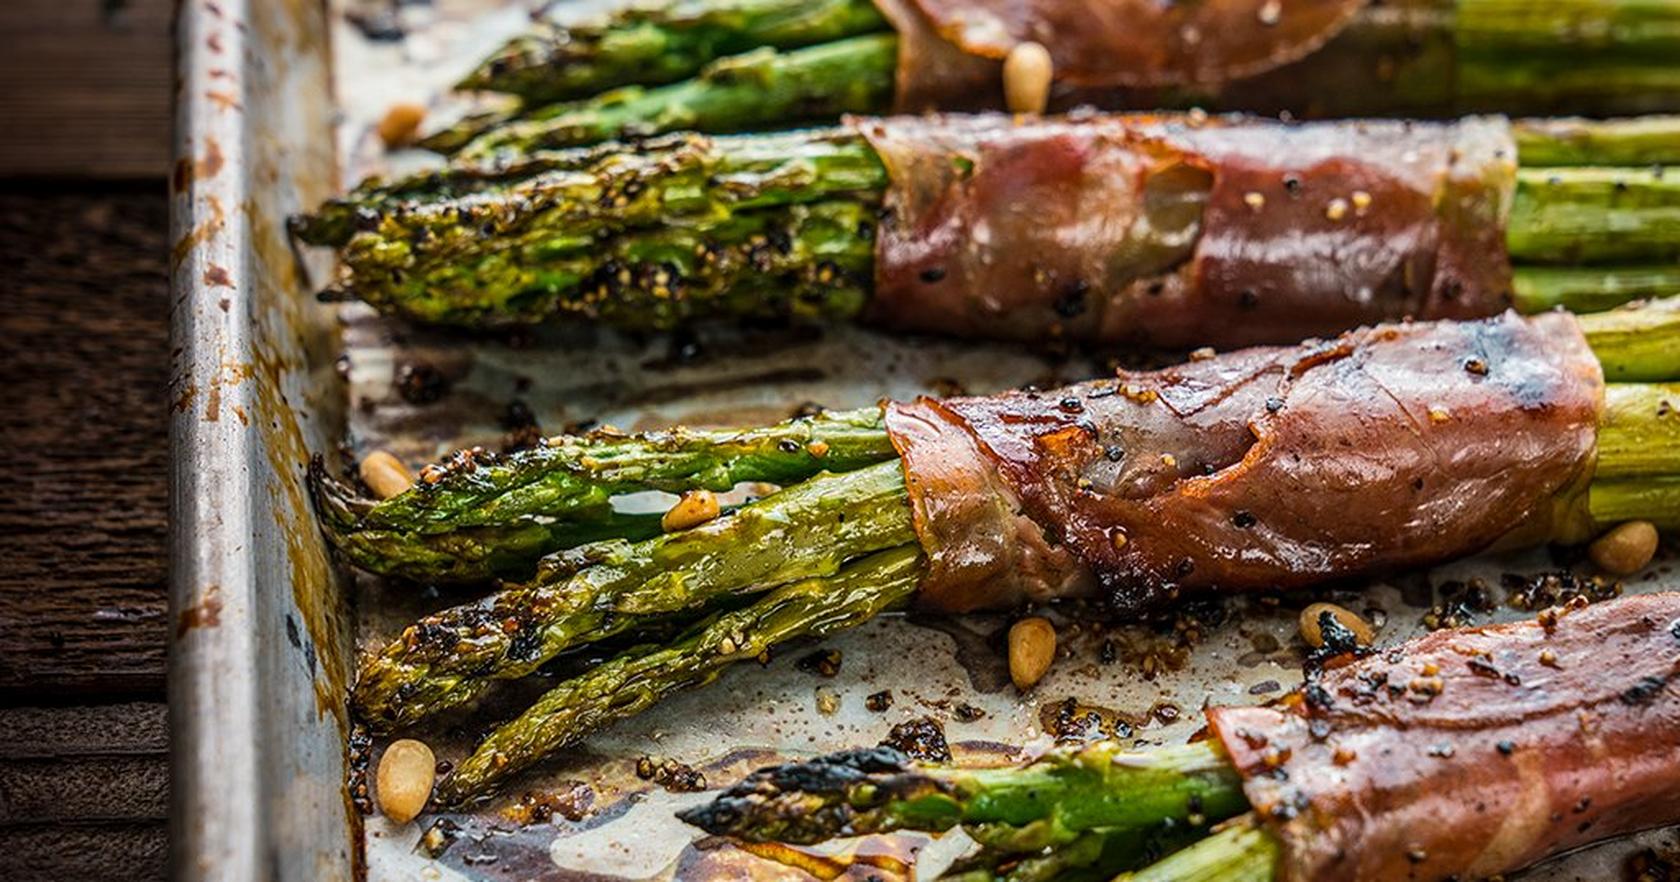 20190614_Grilled-Prosciutto-Wrapped-Asparagus-With-Balsamic-Glaze_RE_HE_M